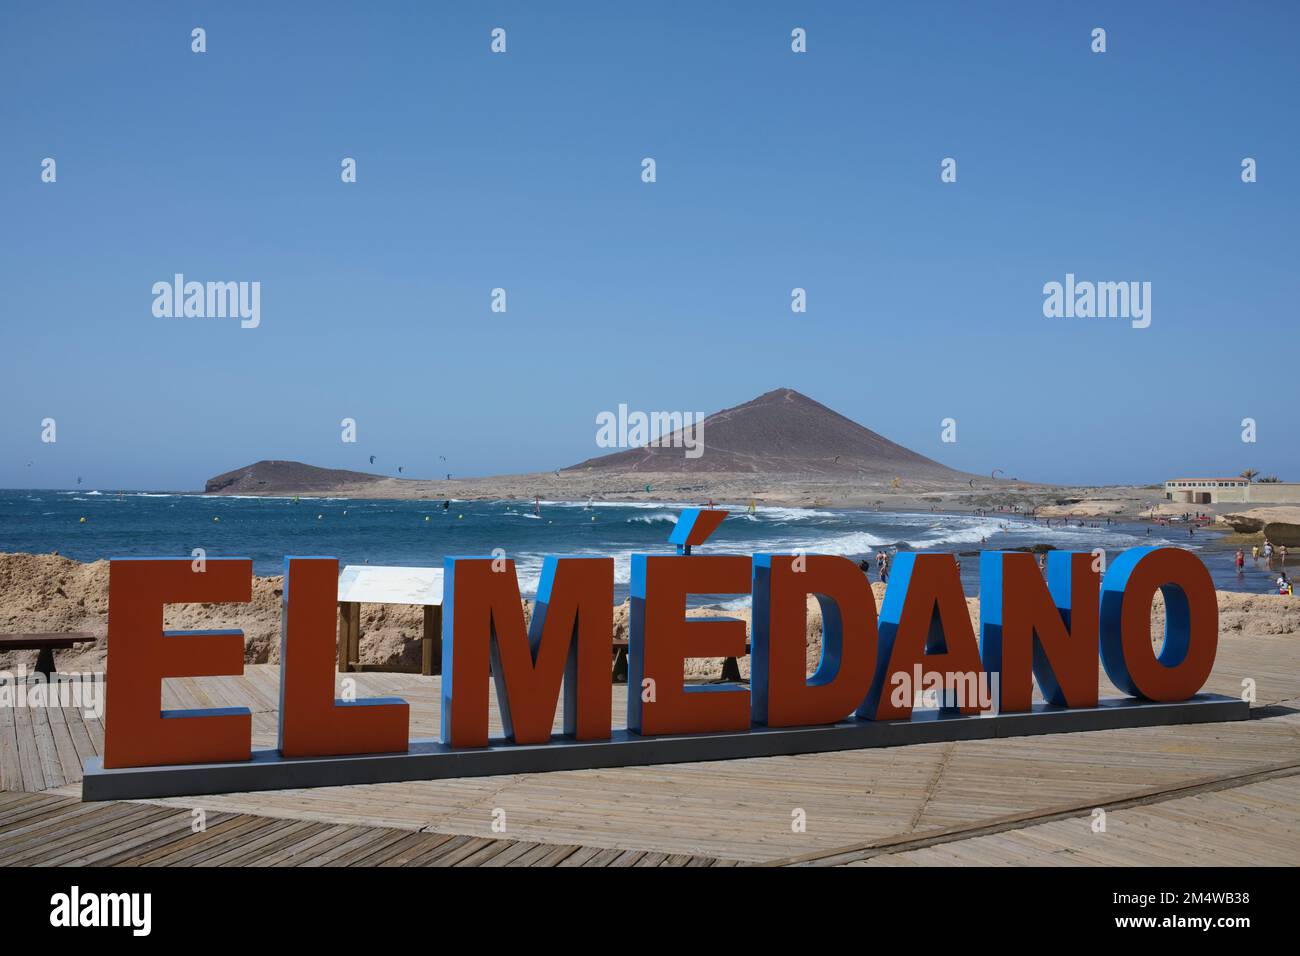 Red and blue giant letters spell out the name of the coastal town, El Medano, a mecca for windsurfers, kitesurfers and holidaymakers who enjoy watersp Stock Photo